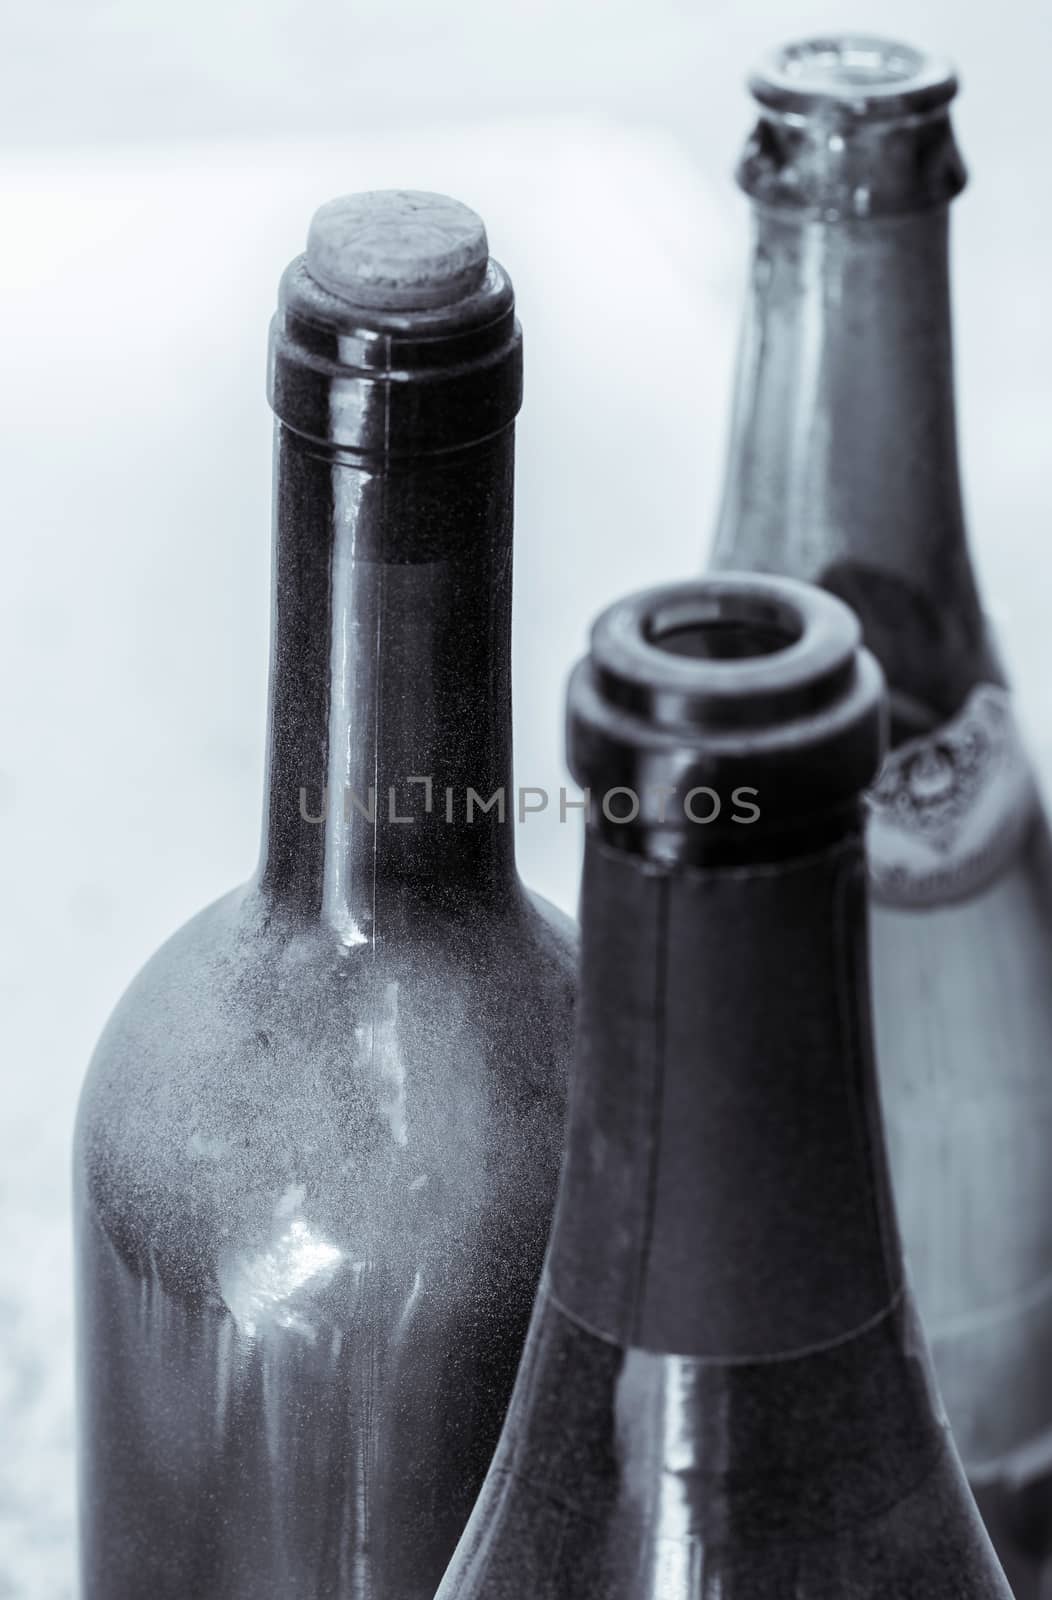 Some very old wine bottles - in  Black and White shot. by kerdkanno